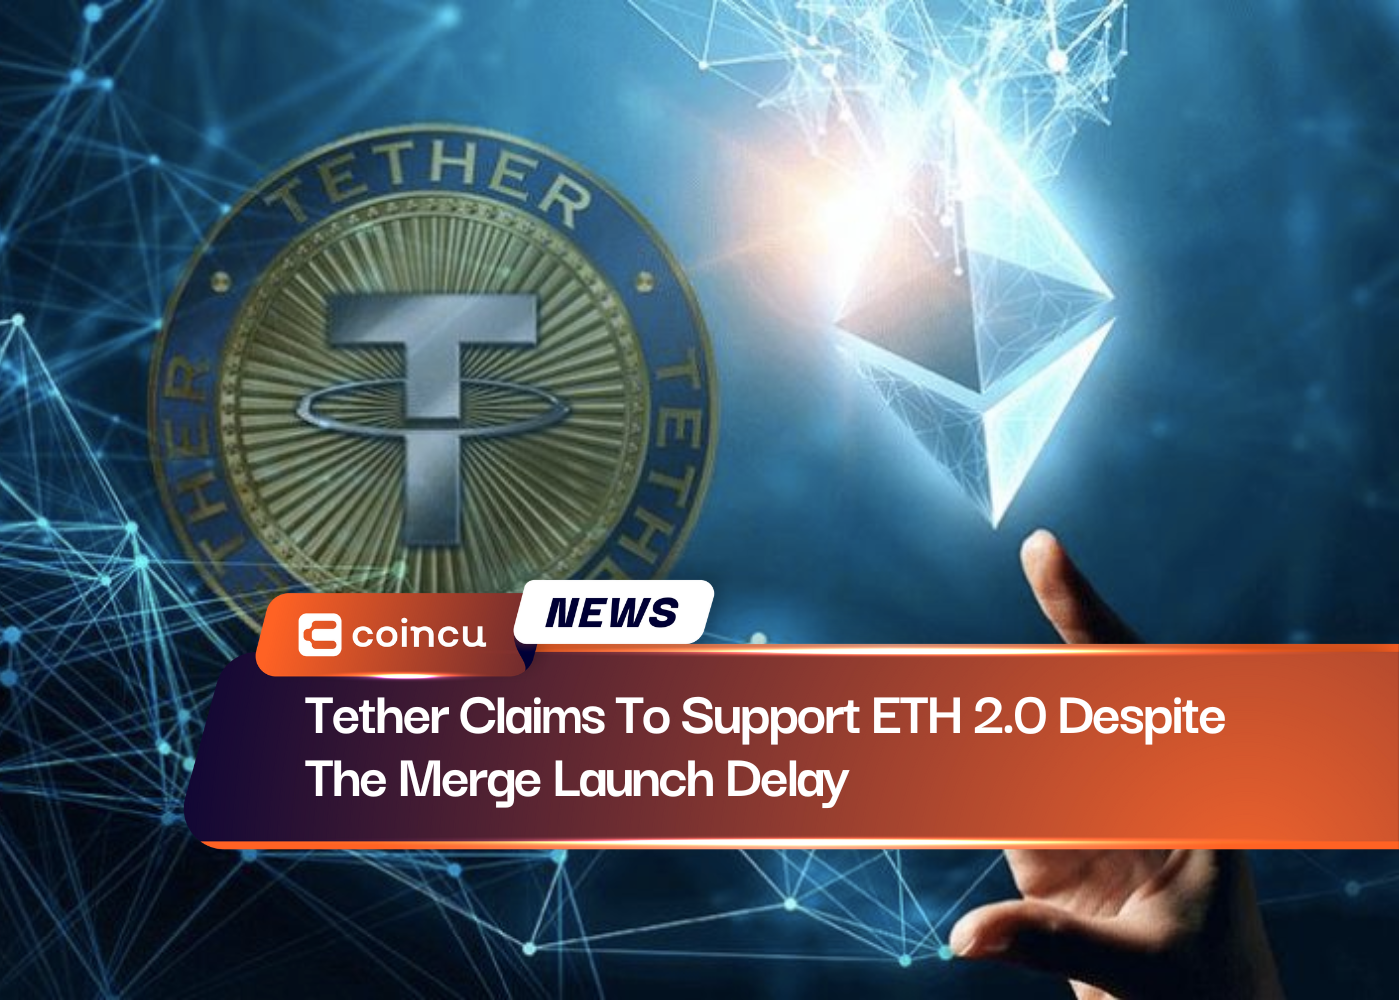 Tether Claims To Support ETH 2.0 Despite The Merge Launch Delay